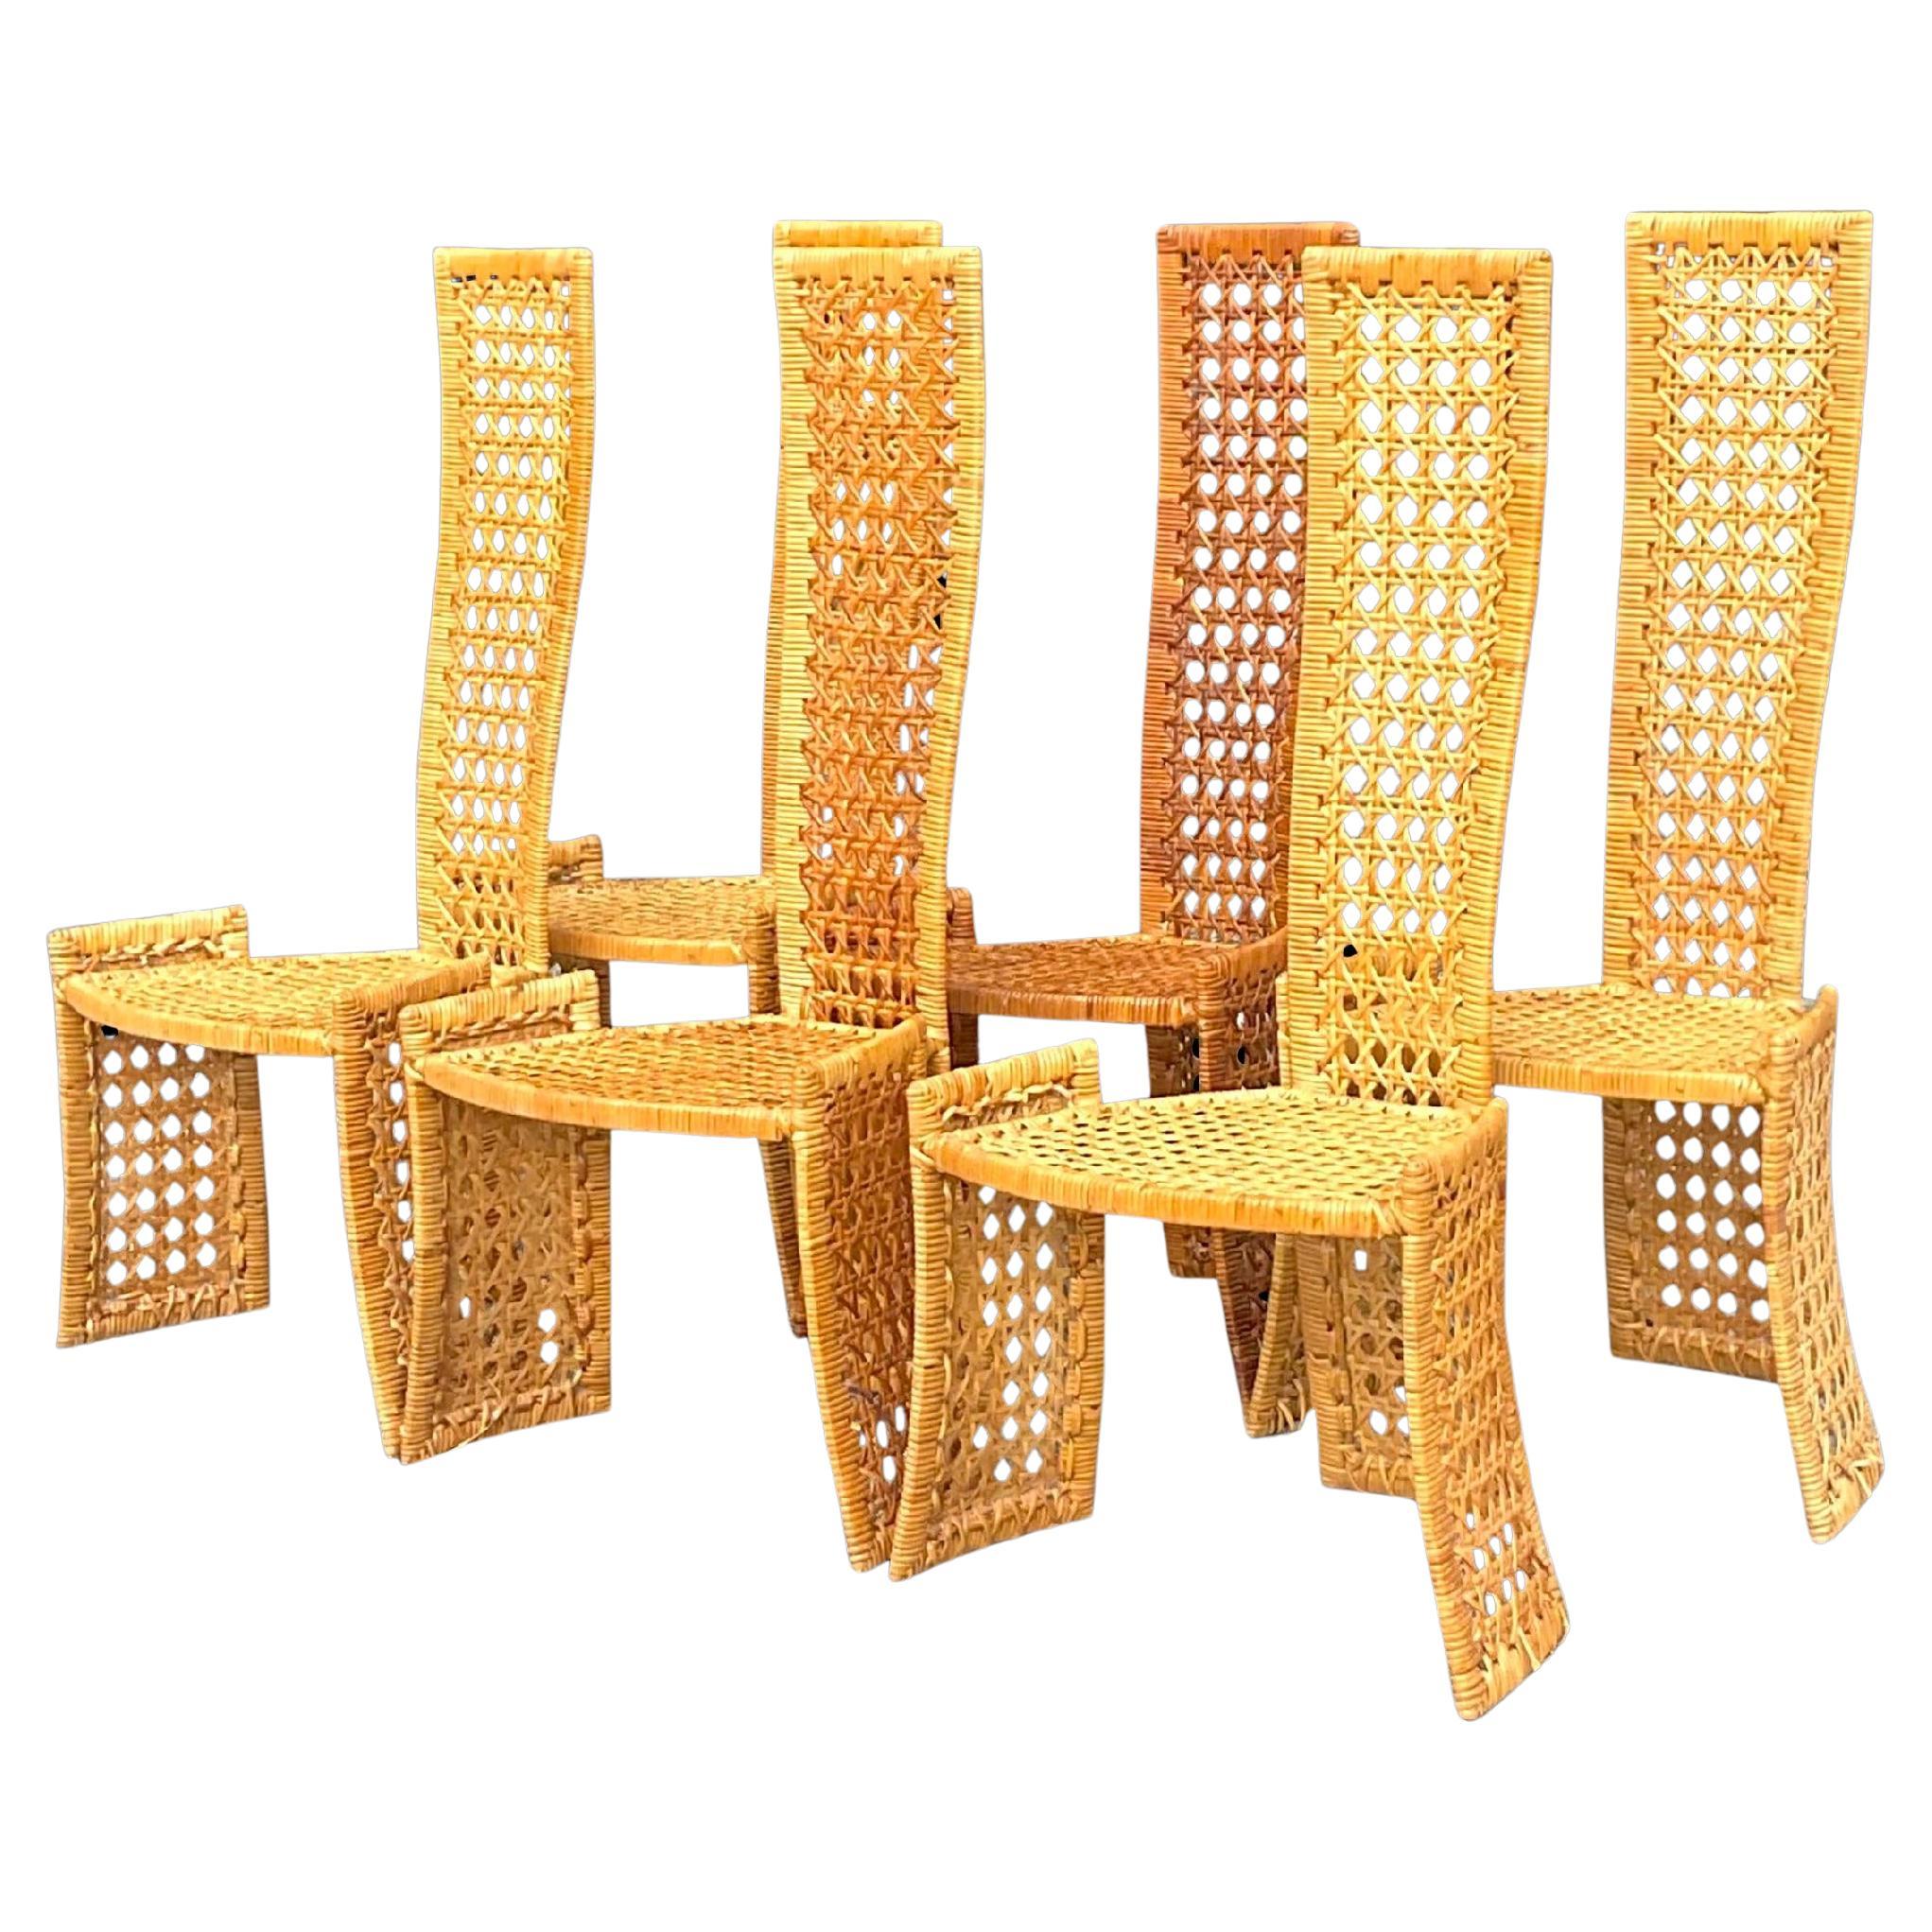 Vintage Coastal Woven Rattan Dining Chairs After Danny Ho Fong- Set of 6